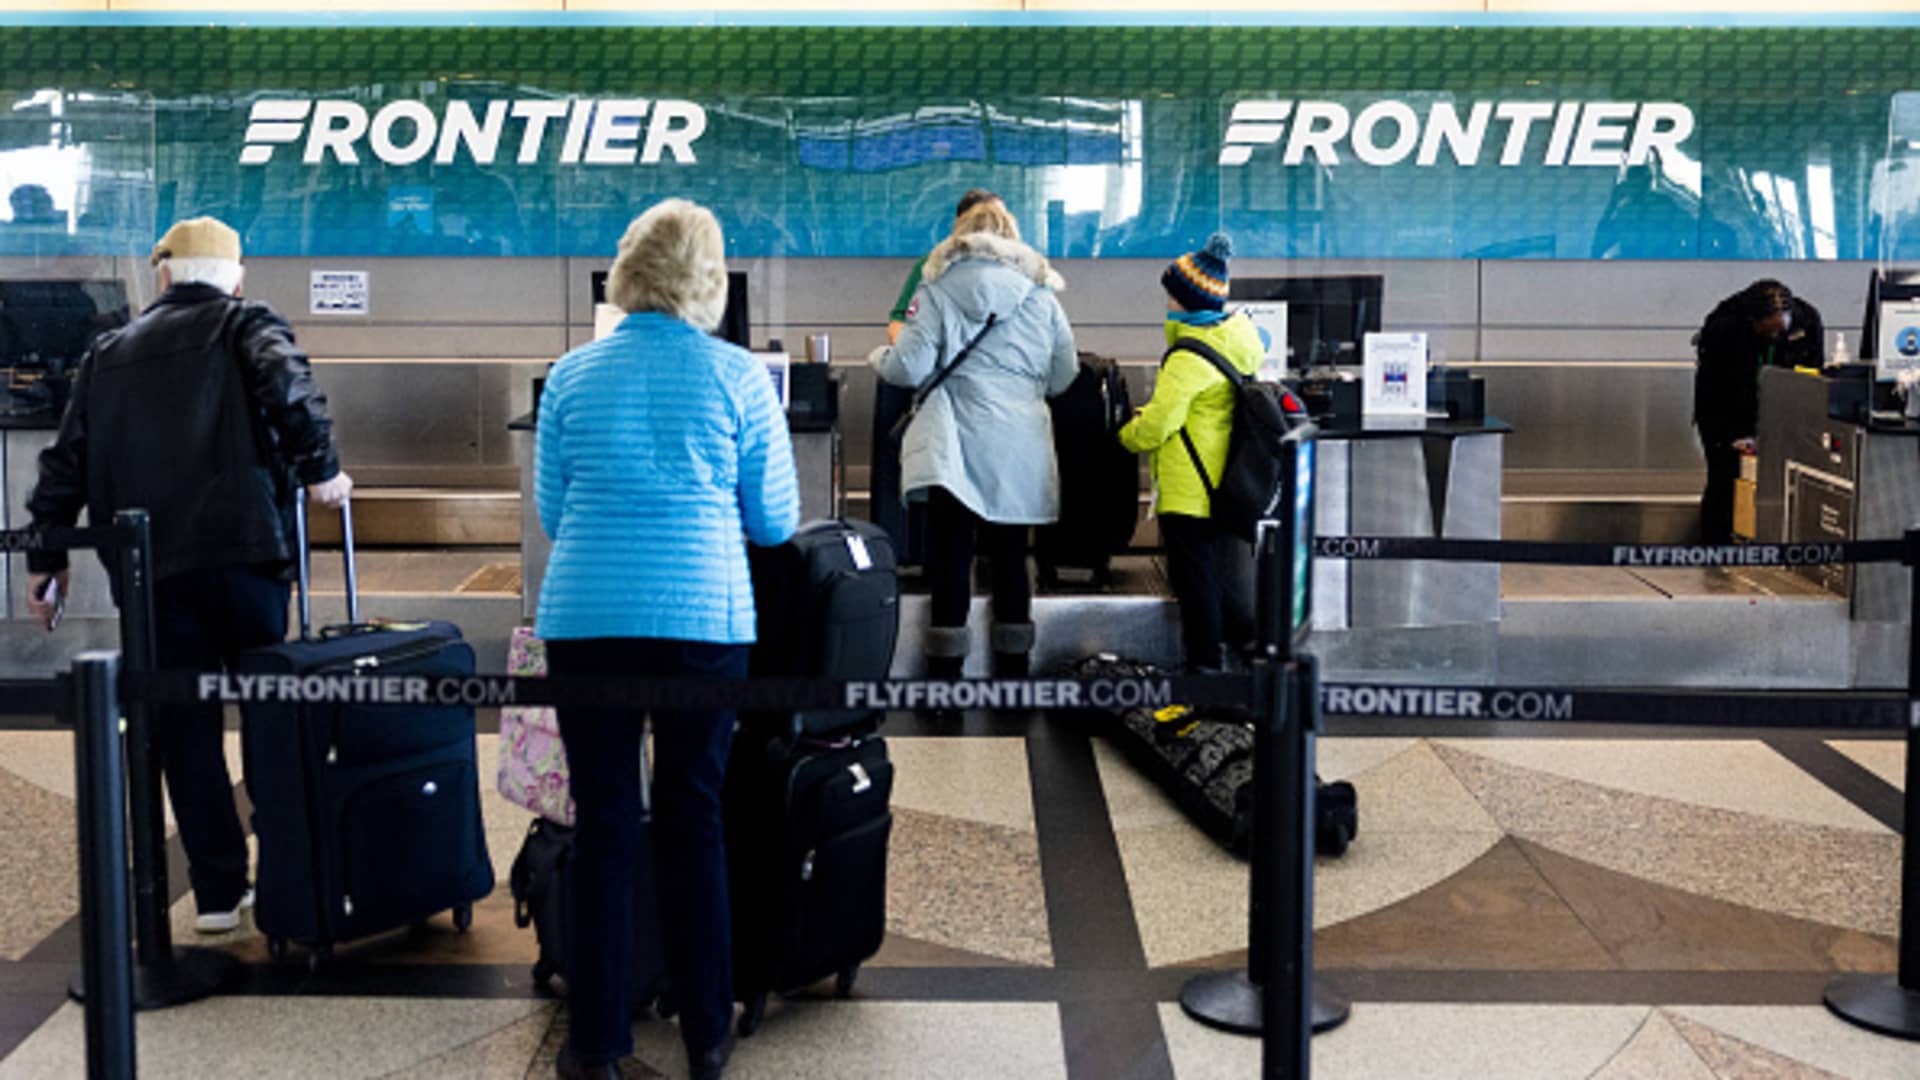 Discount airfares rising thanks to higher fuel costs, demand, Frontier CEO says